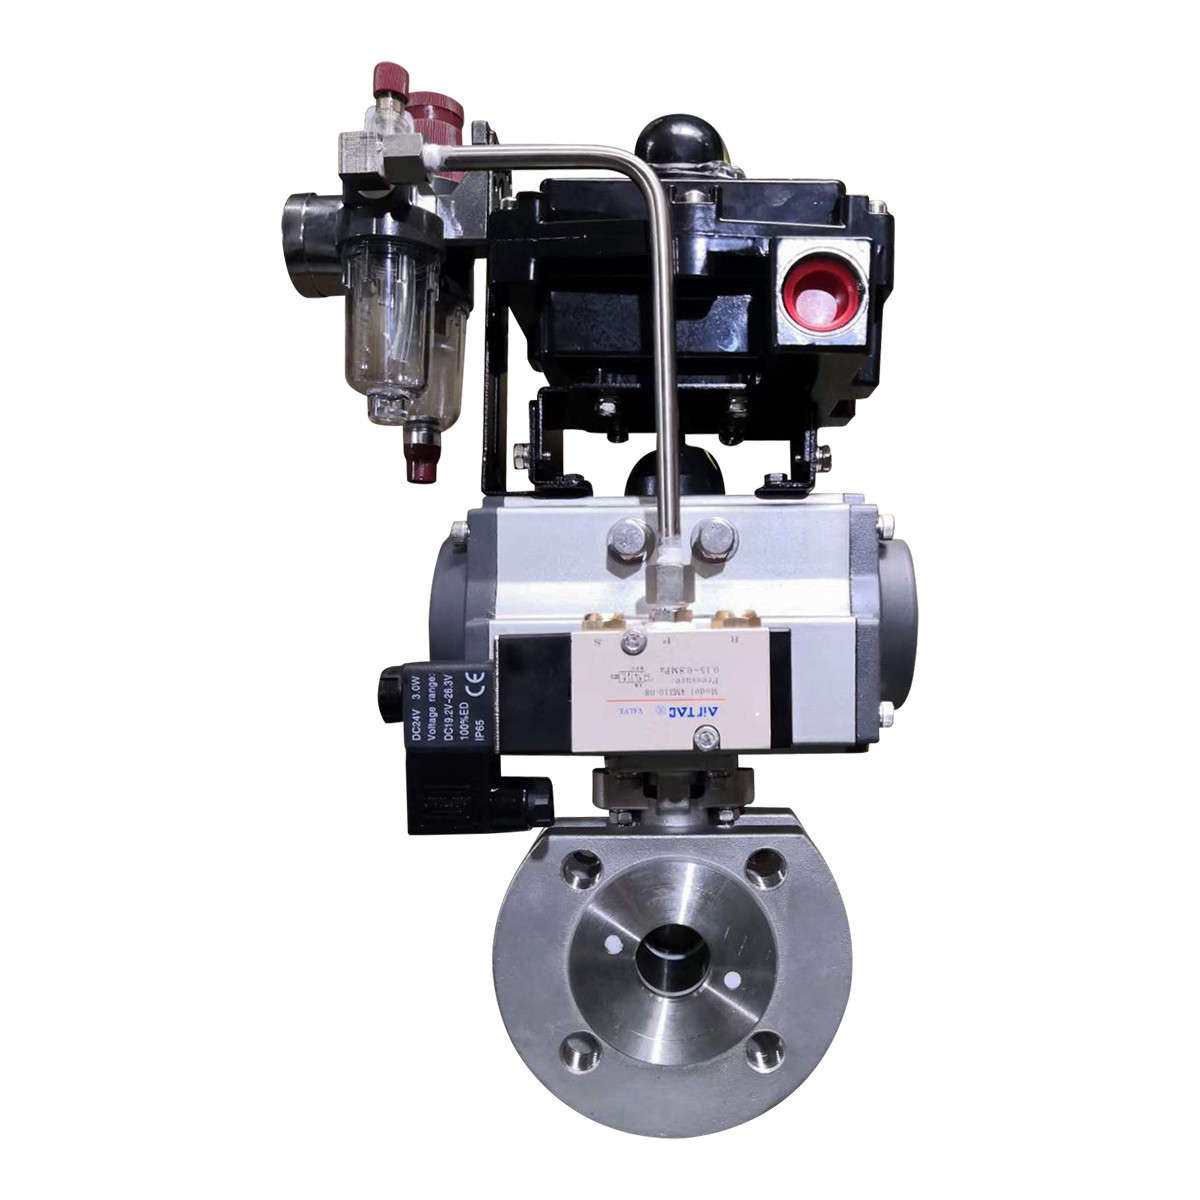 Stainless steel Wafer ball valve with pneumatic actuator